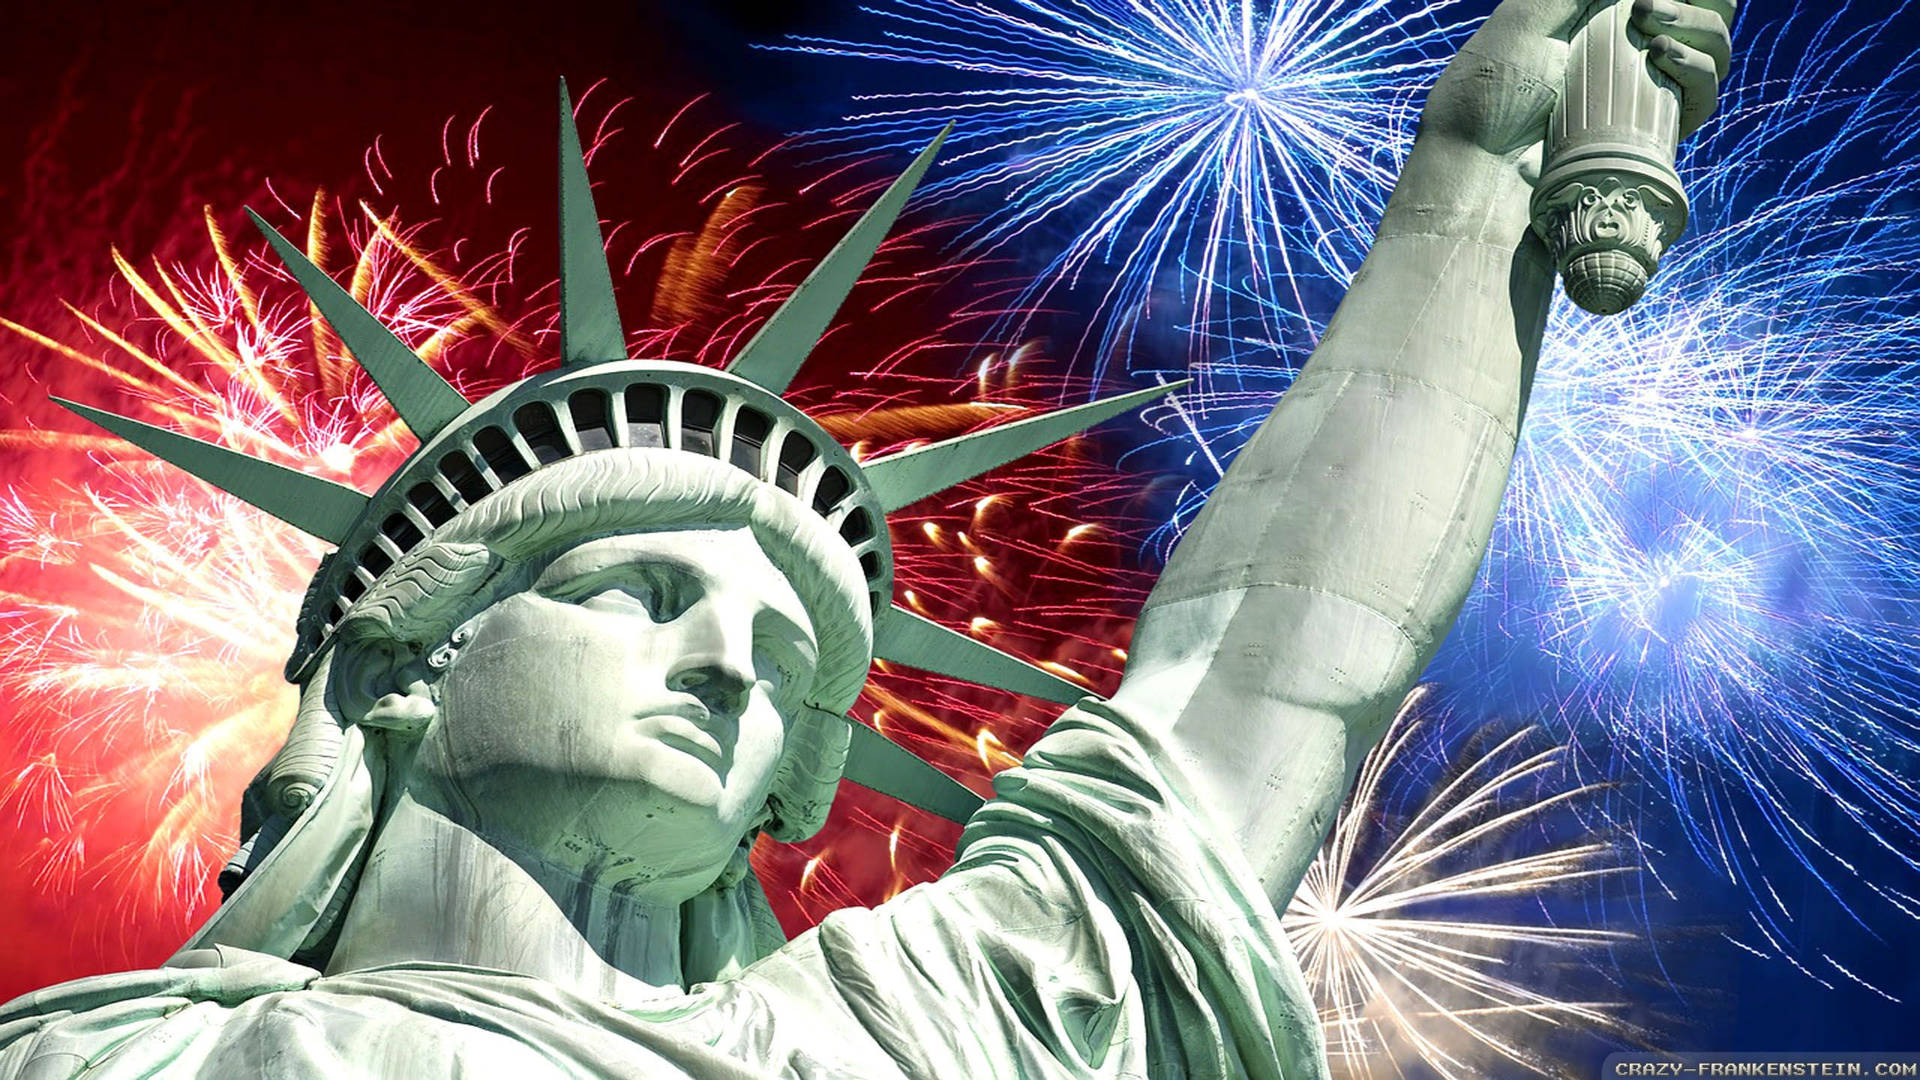 July 4th Fireworks Wallpaper - Independence Day Wallpaper - Crazy Background